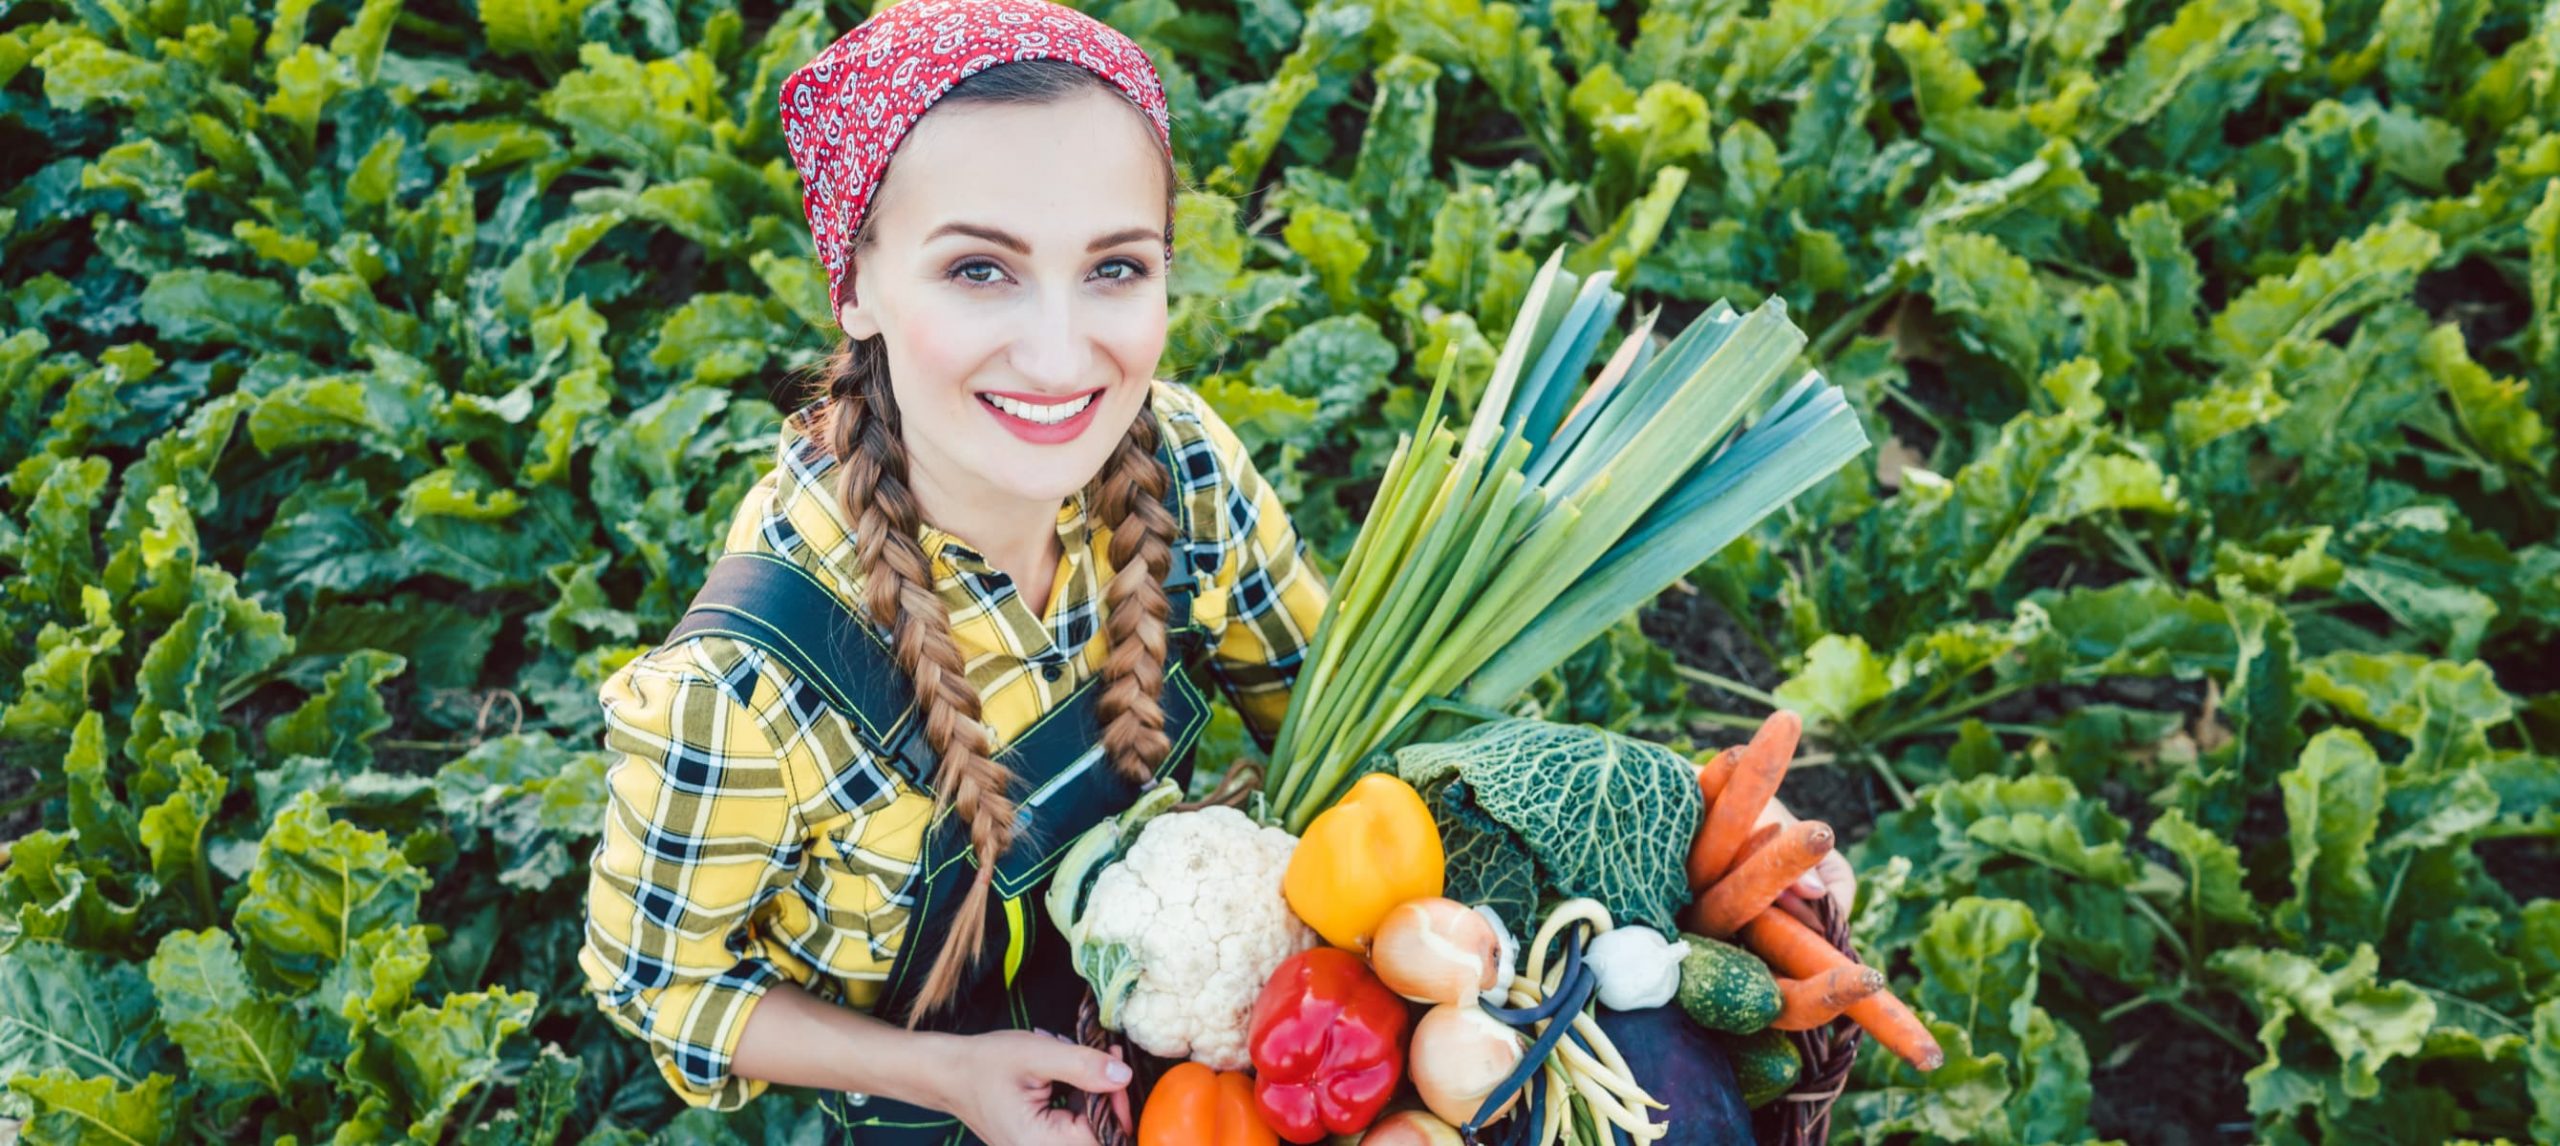 Farmer woman in a field offering colorful organic vegetables as healthy food.